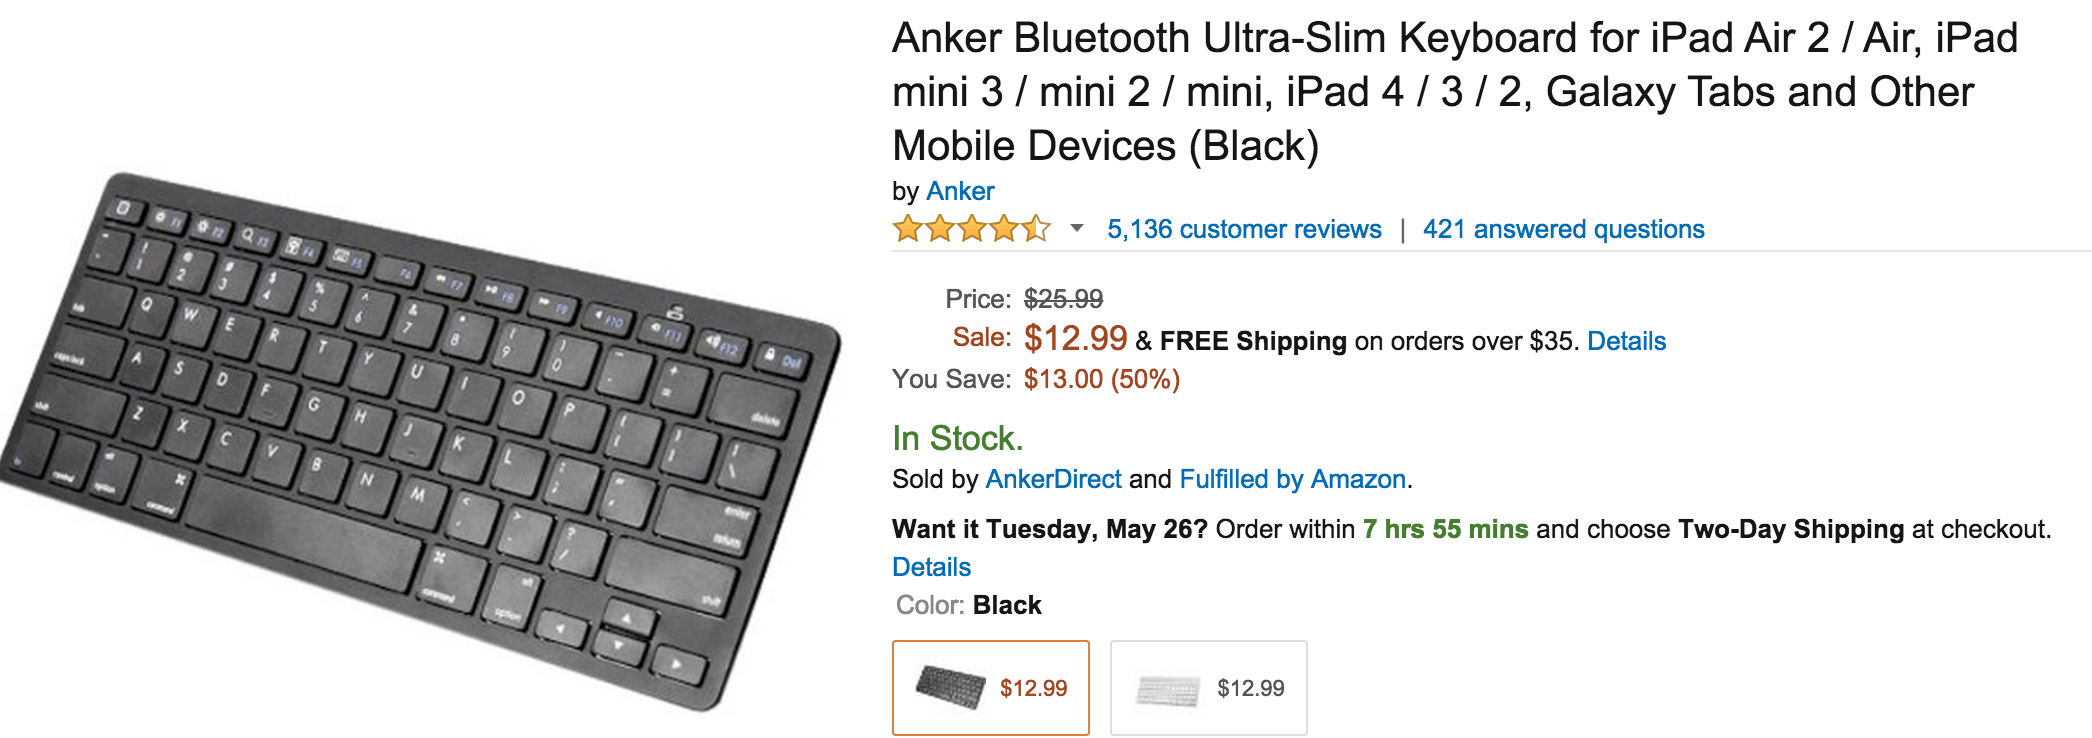 Anker Ultra-Slim Mini Bluetooth Keyboard for Mac, iPad, Apple TV, Android,  PC more: $13 Prime shipped